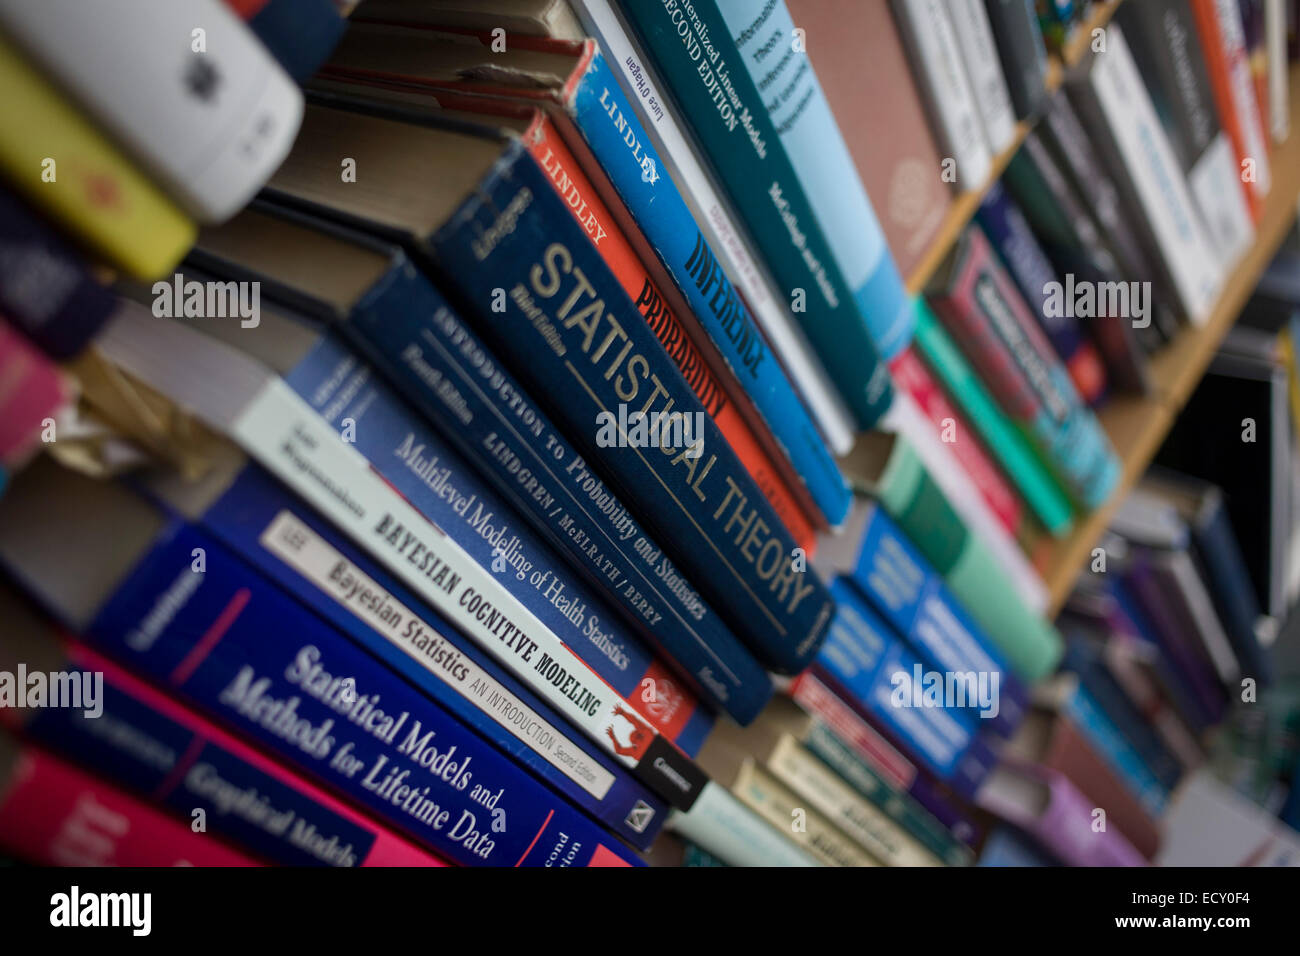 Text books about maths, probability and risk, belonging to mathematician and Risk guru, Professor David Spiegelhalter. Stock Photo